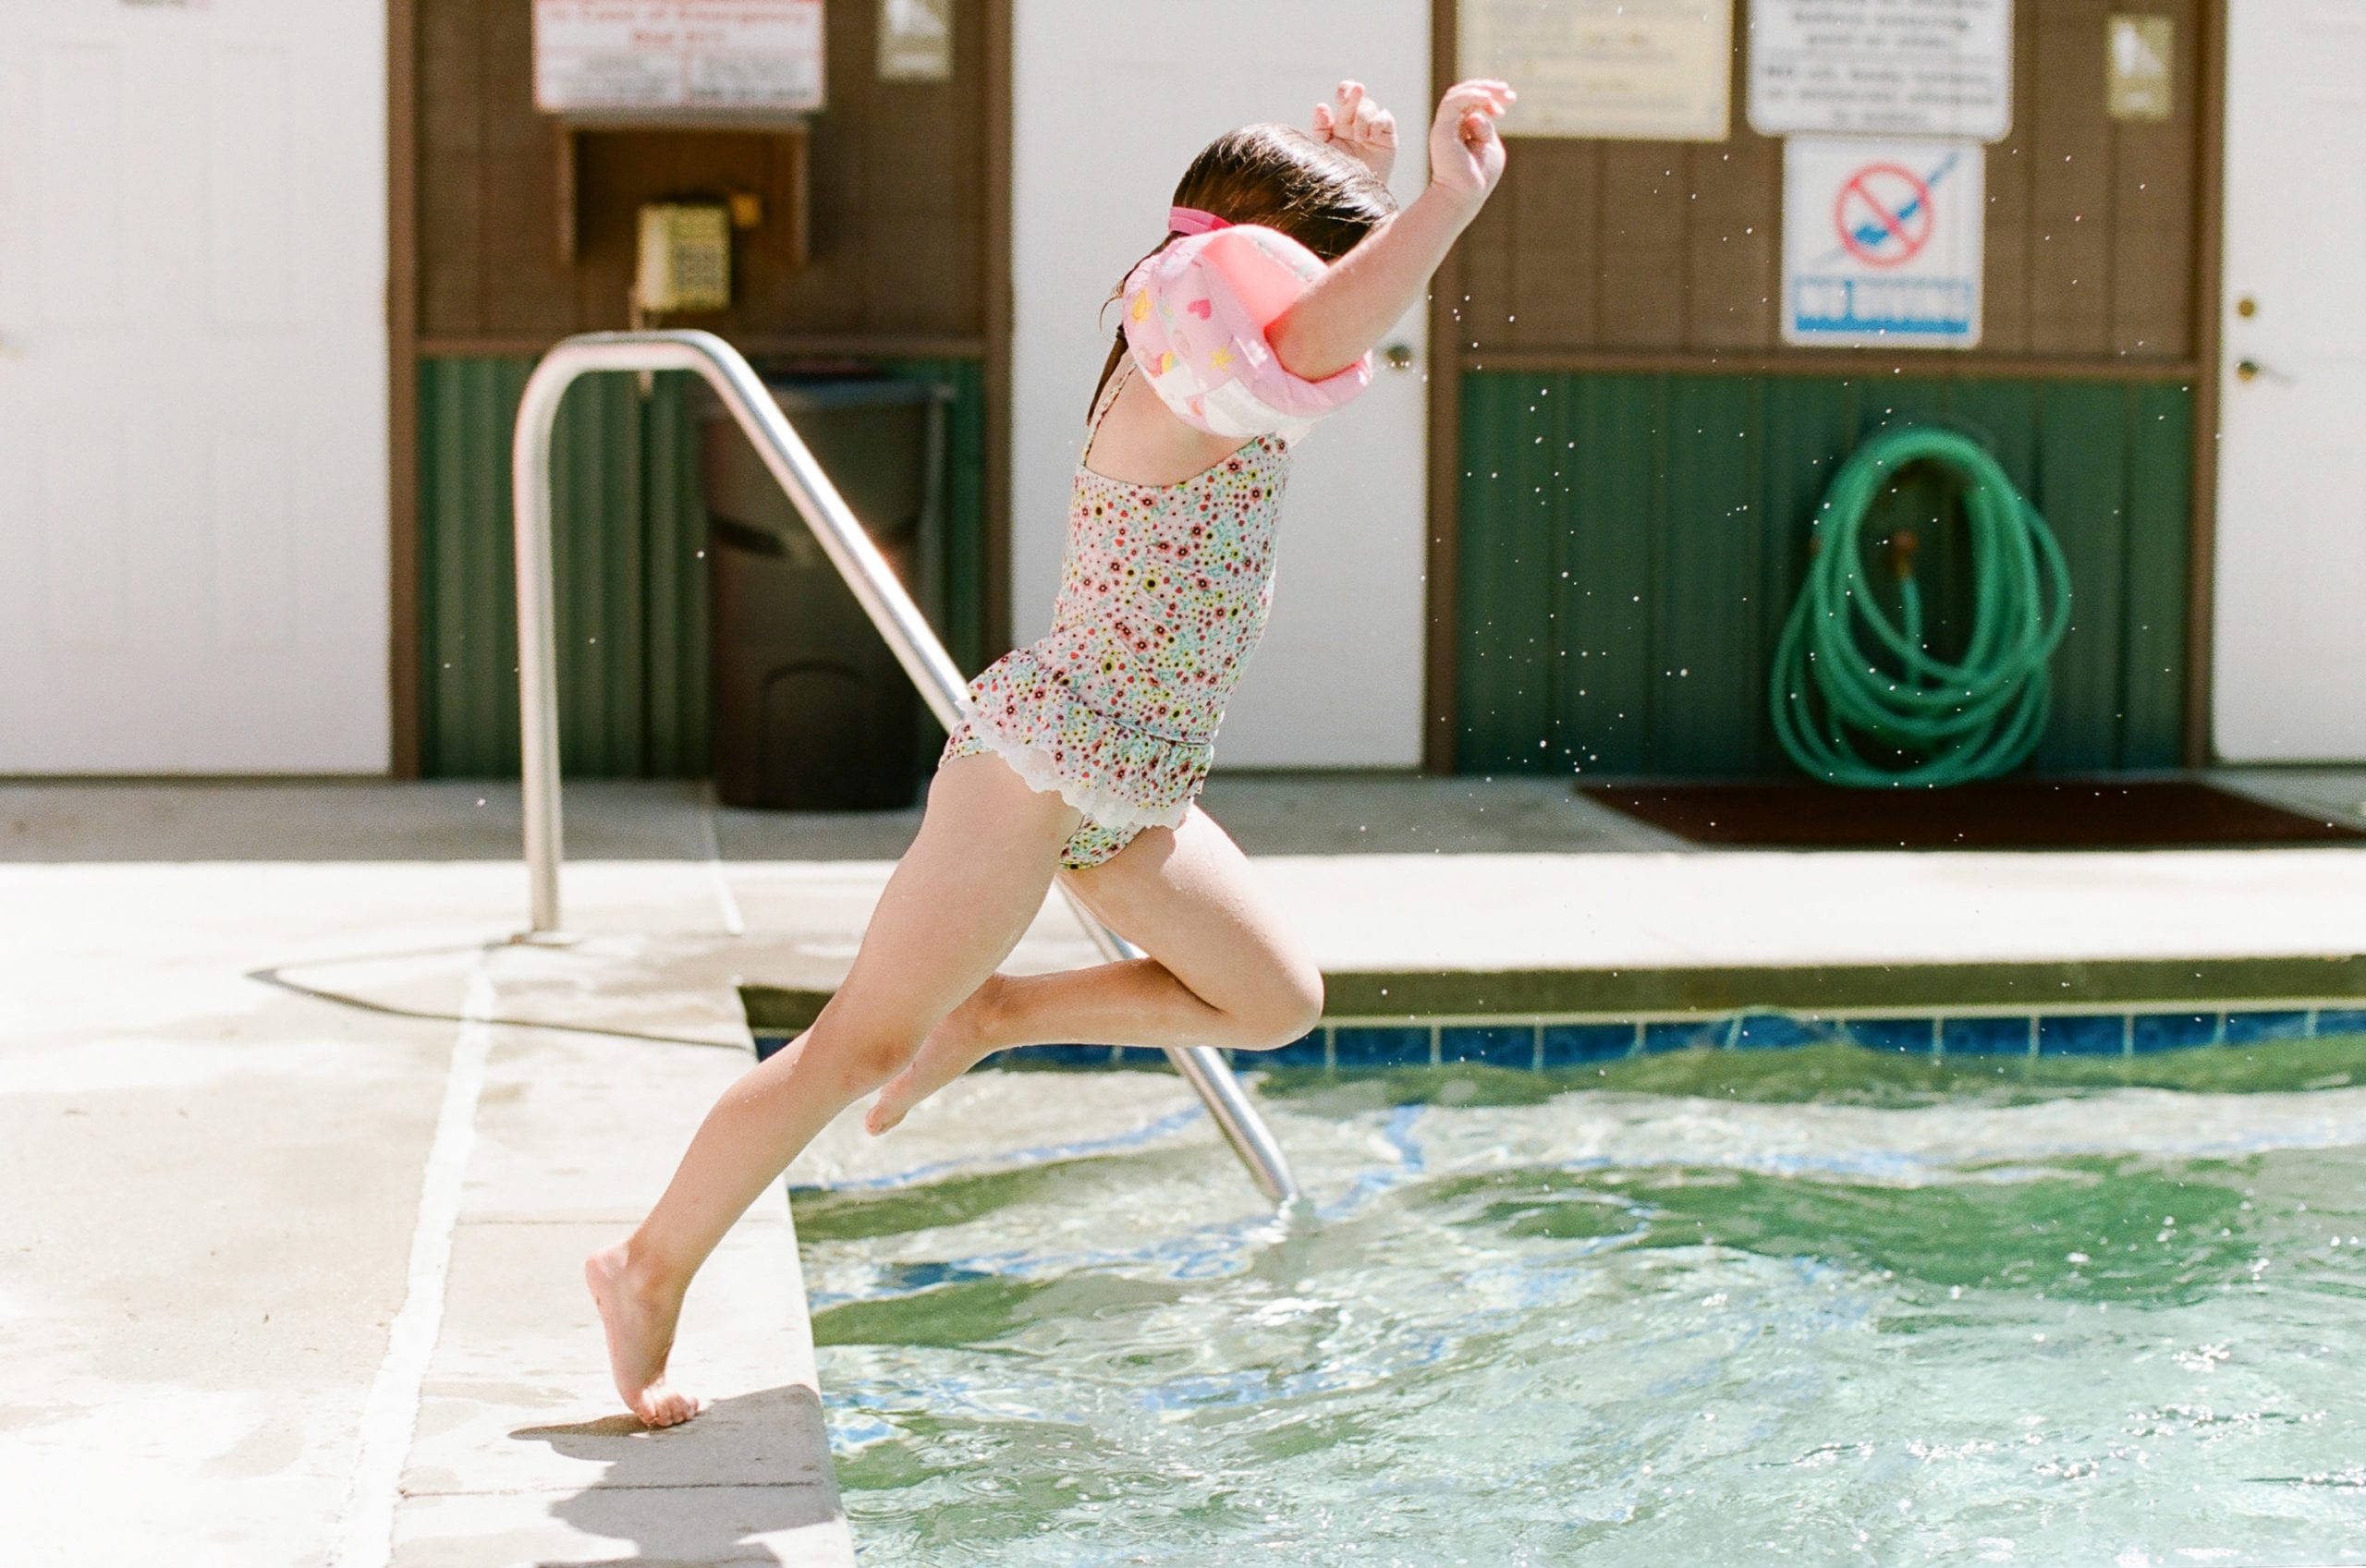 Portra 160 film of girl jumping in pool photo